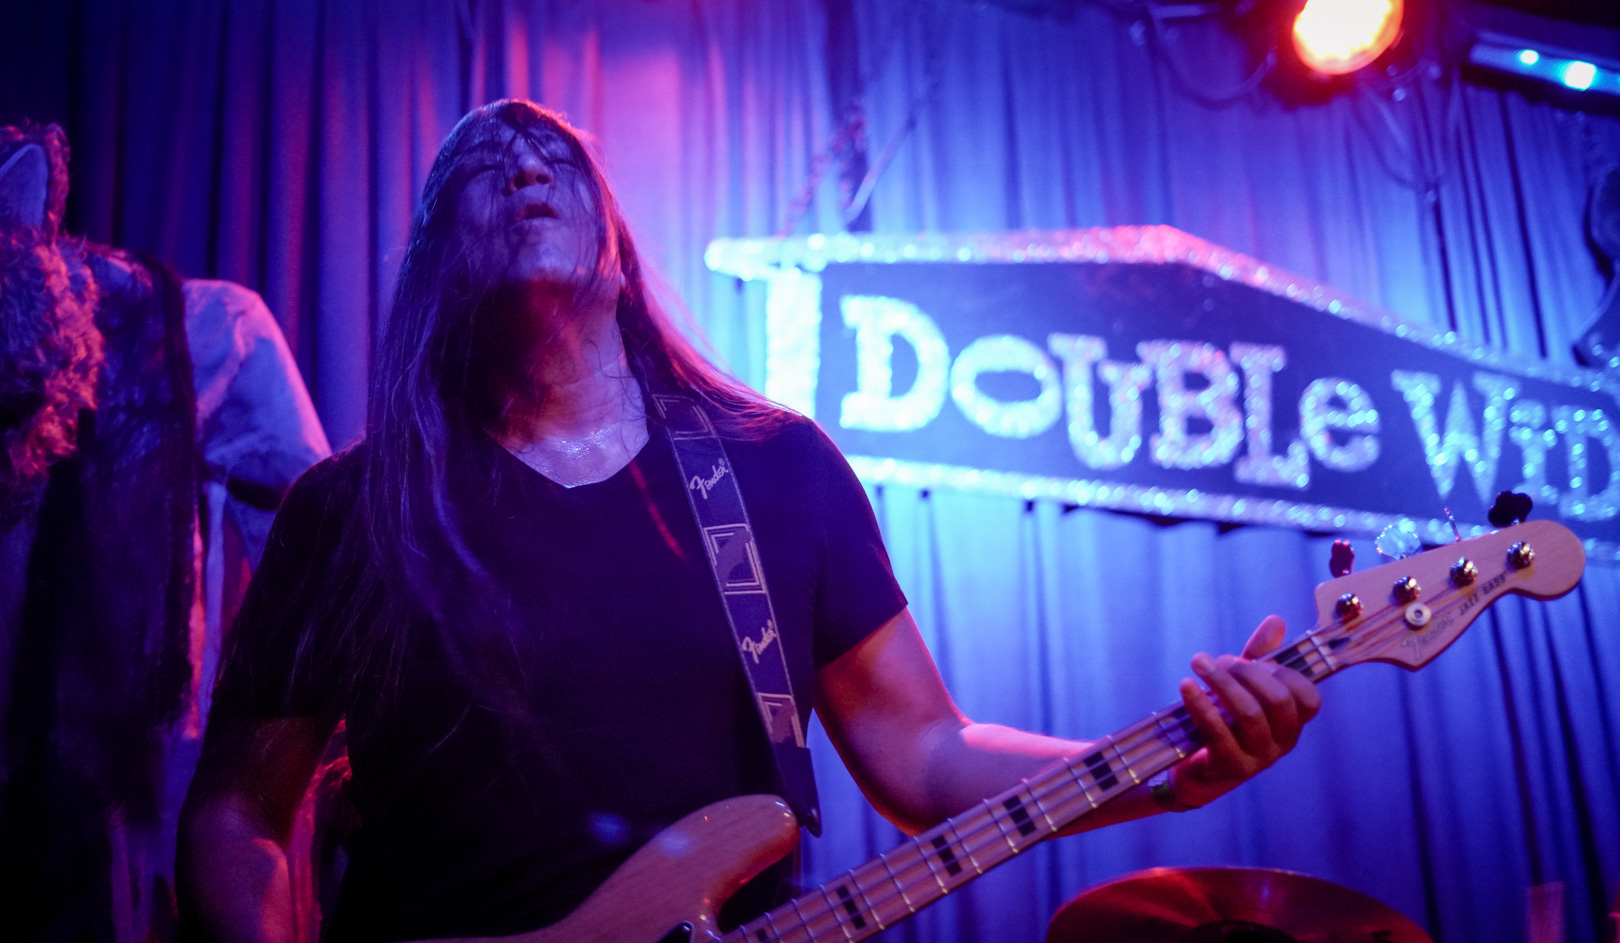 A bassist with long hair on stage